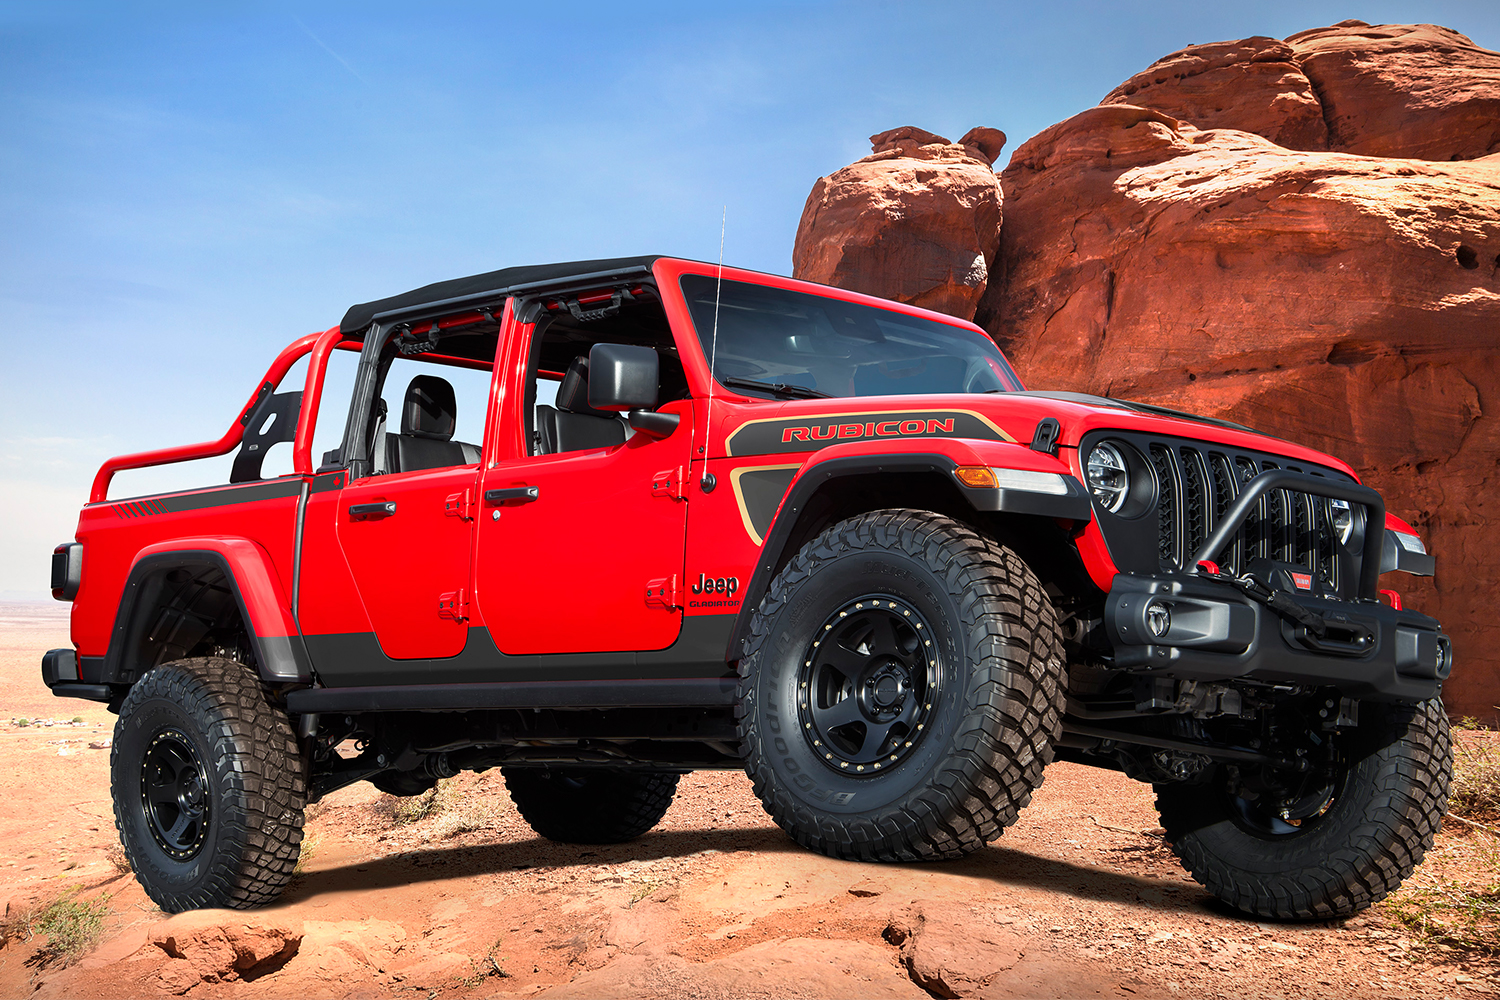 The Jeep Red Bare Gladiator Rubicon Concept Vehicle